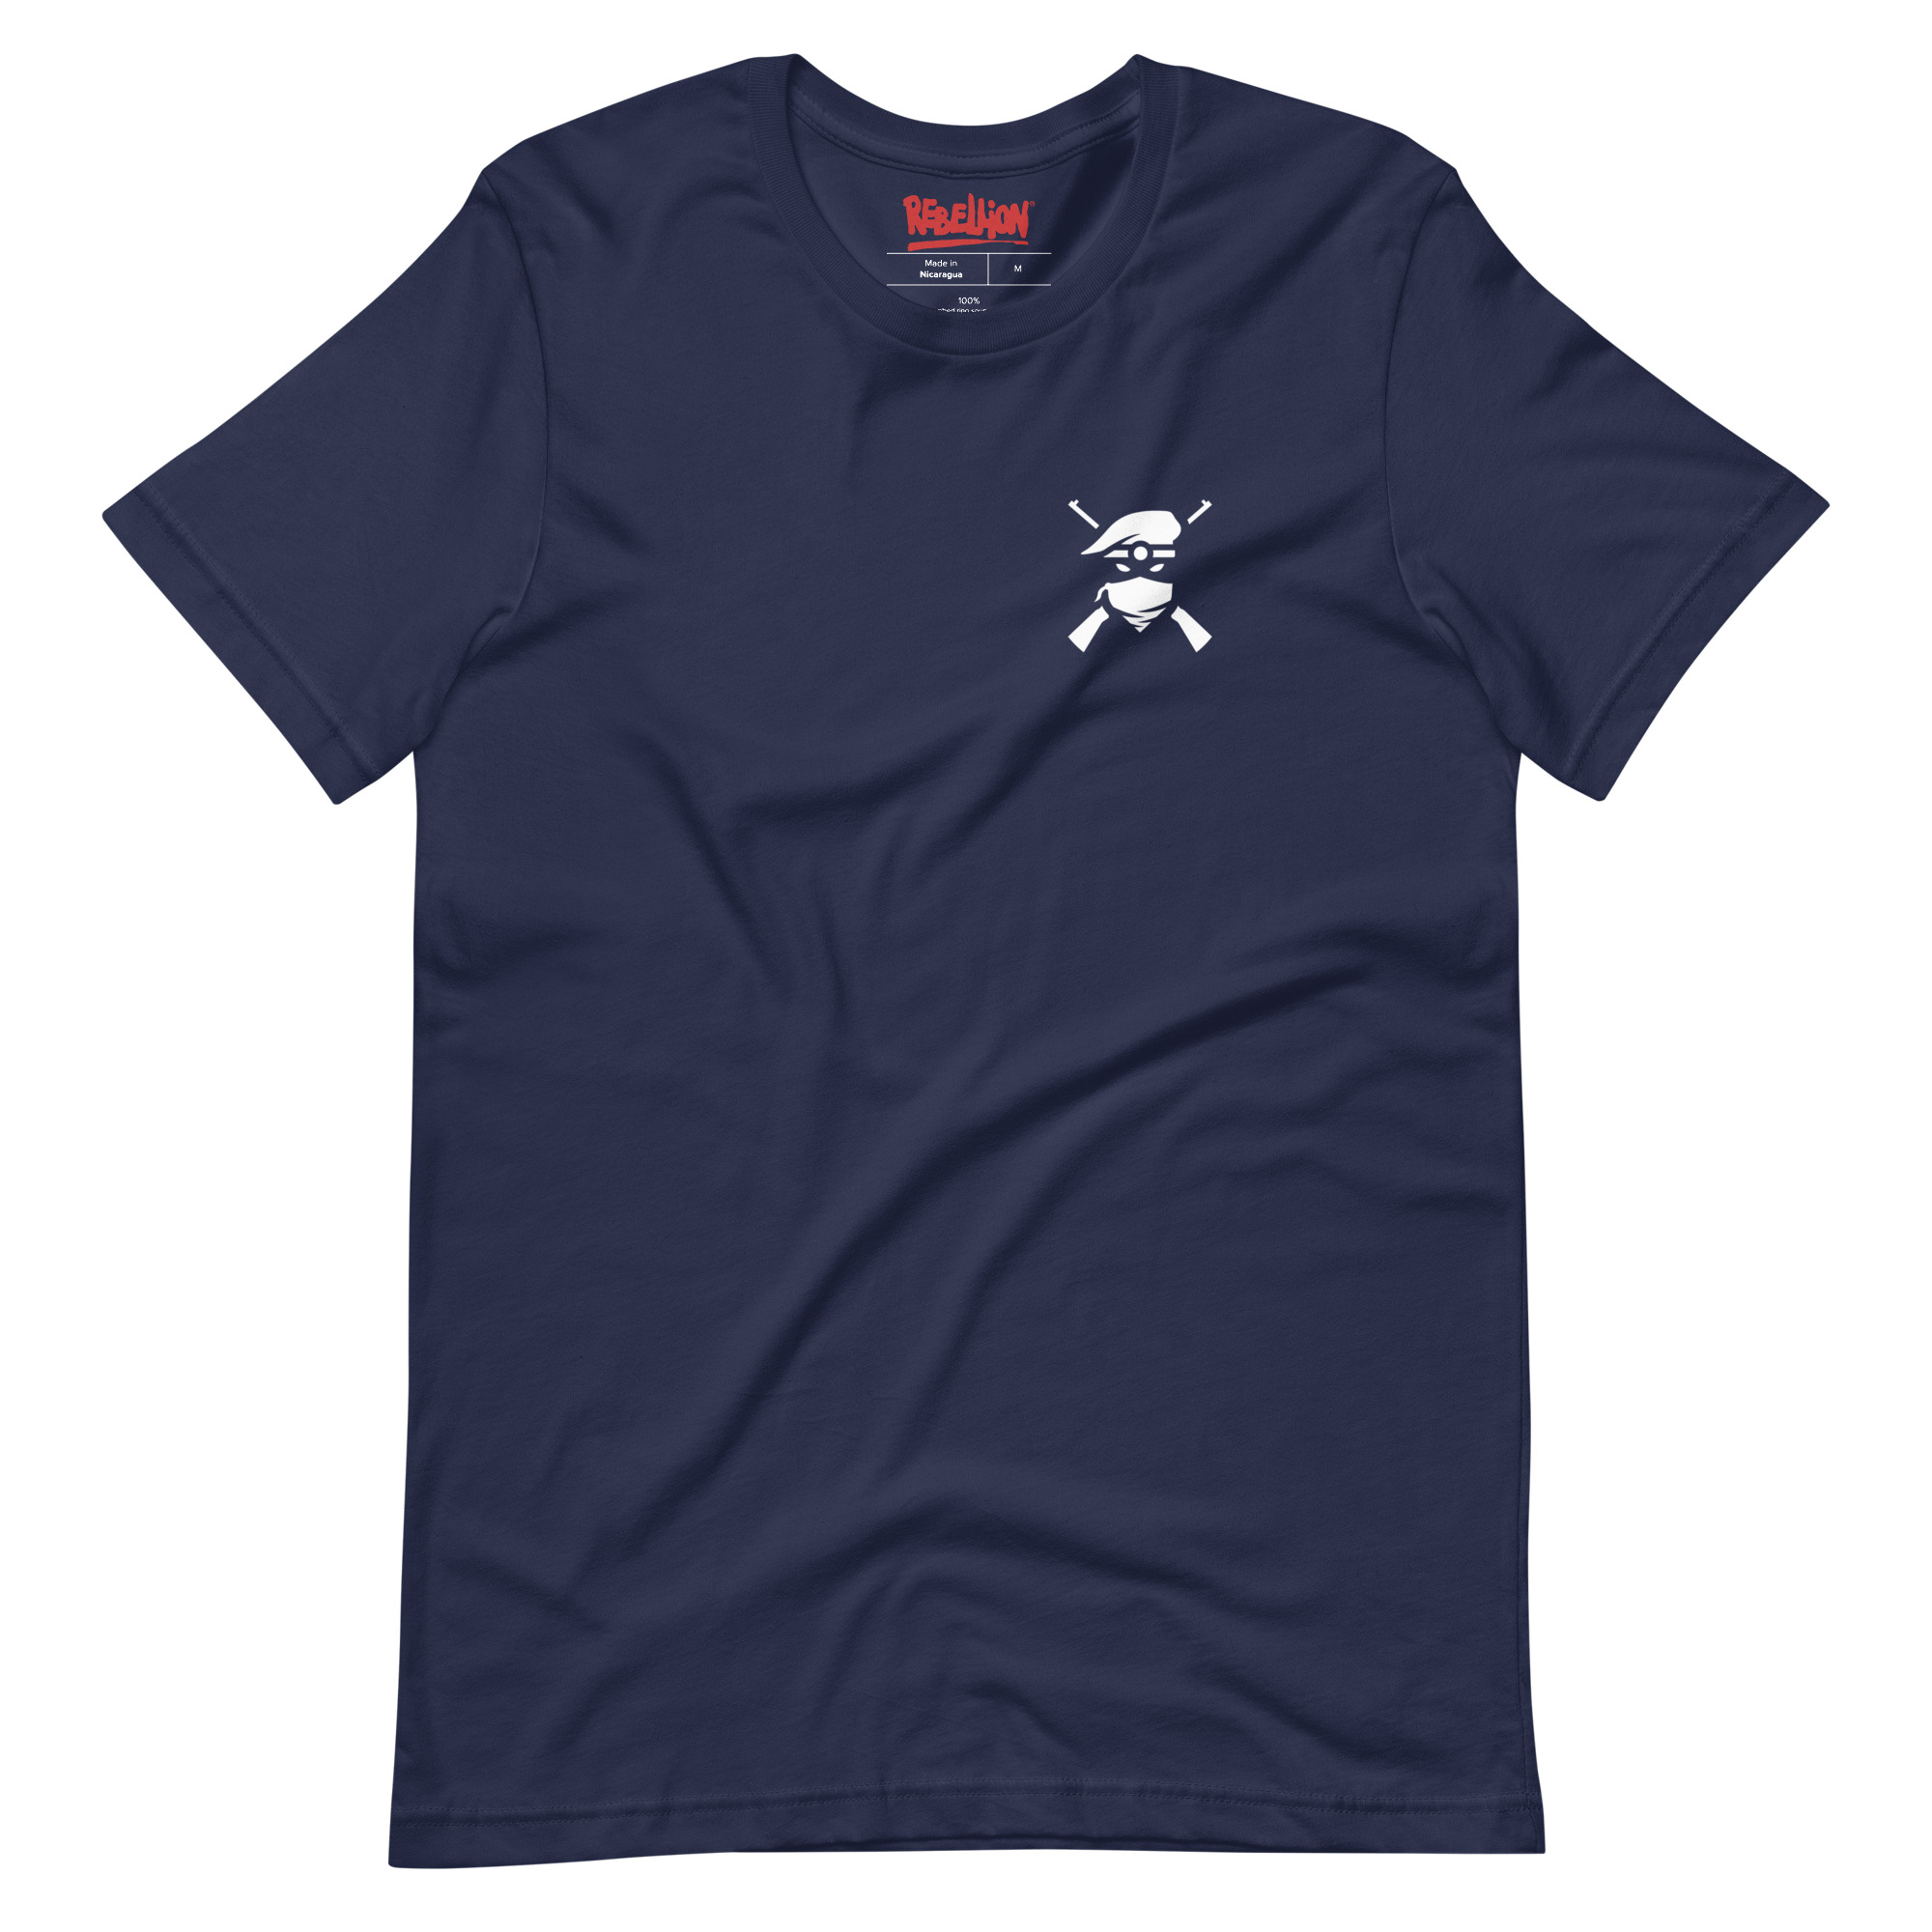 Image of a Navy coloured Sniper Elite 5 t-shirt featuring a small Renegades emblem on the left breast pocket